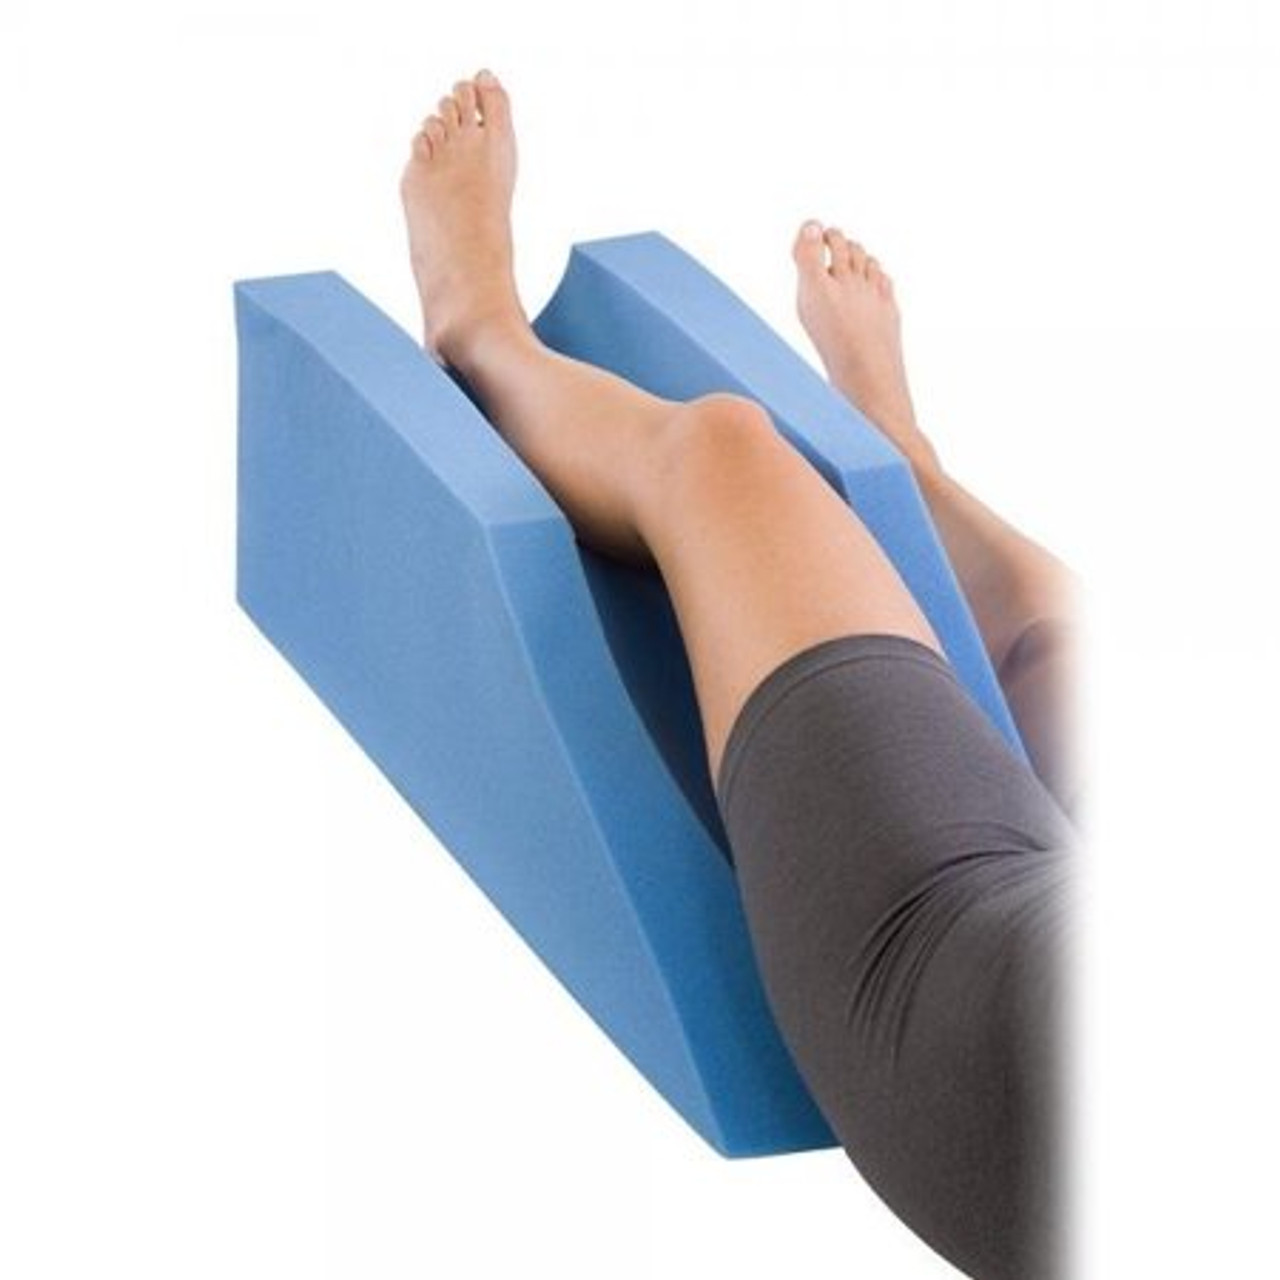 Procare Foam Leg Elevator Cushion - Support And Elevation Pillow For  Surgery, Injury, Or Rest - 10In Height X 31.5In Length - 79-90191 - Blue -  MedicalSupplyMi